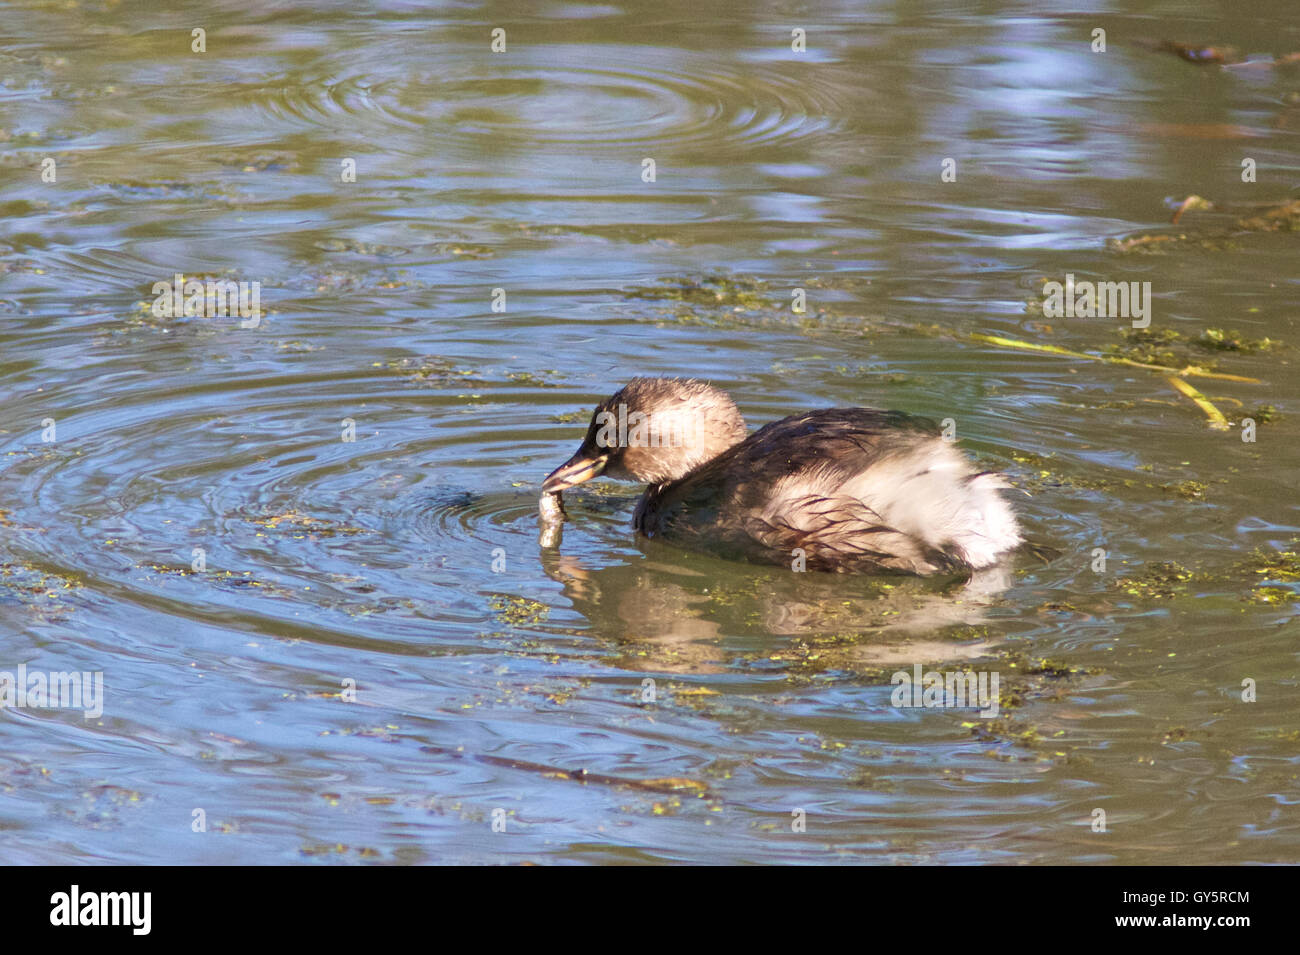 A Little Grebe (Tachybaptus ruficollis) or Dabchick water bird swimming around on a pond on a sunny day with a fish in its bill. Stock Photo